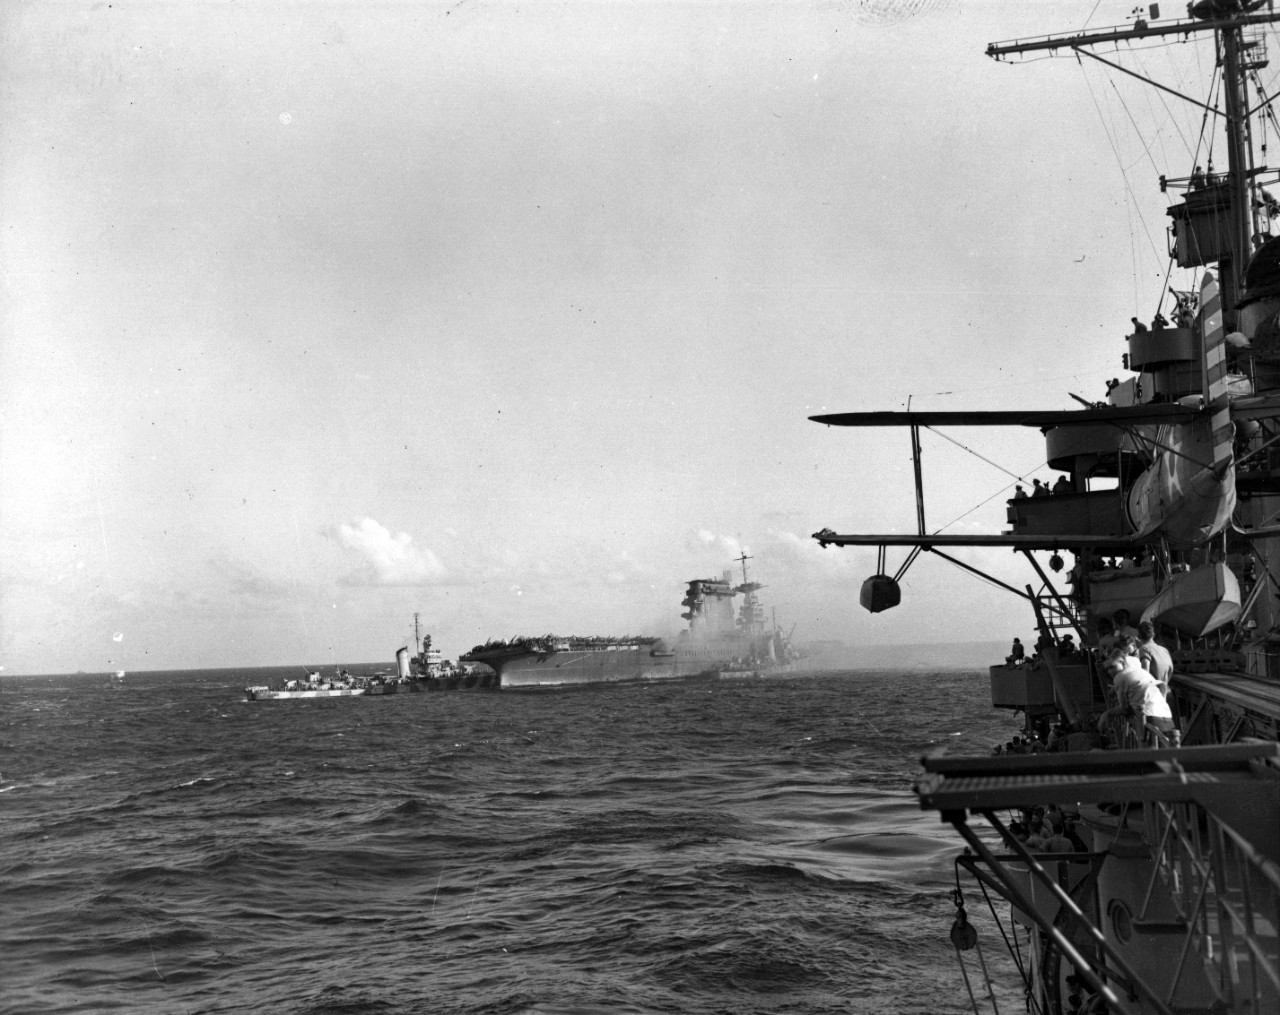 Photo #: 80-G-7403  Battle of the Coral Sea, May 1942